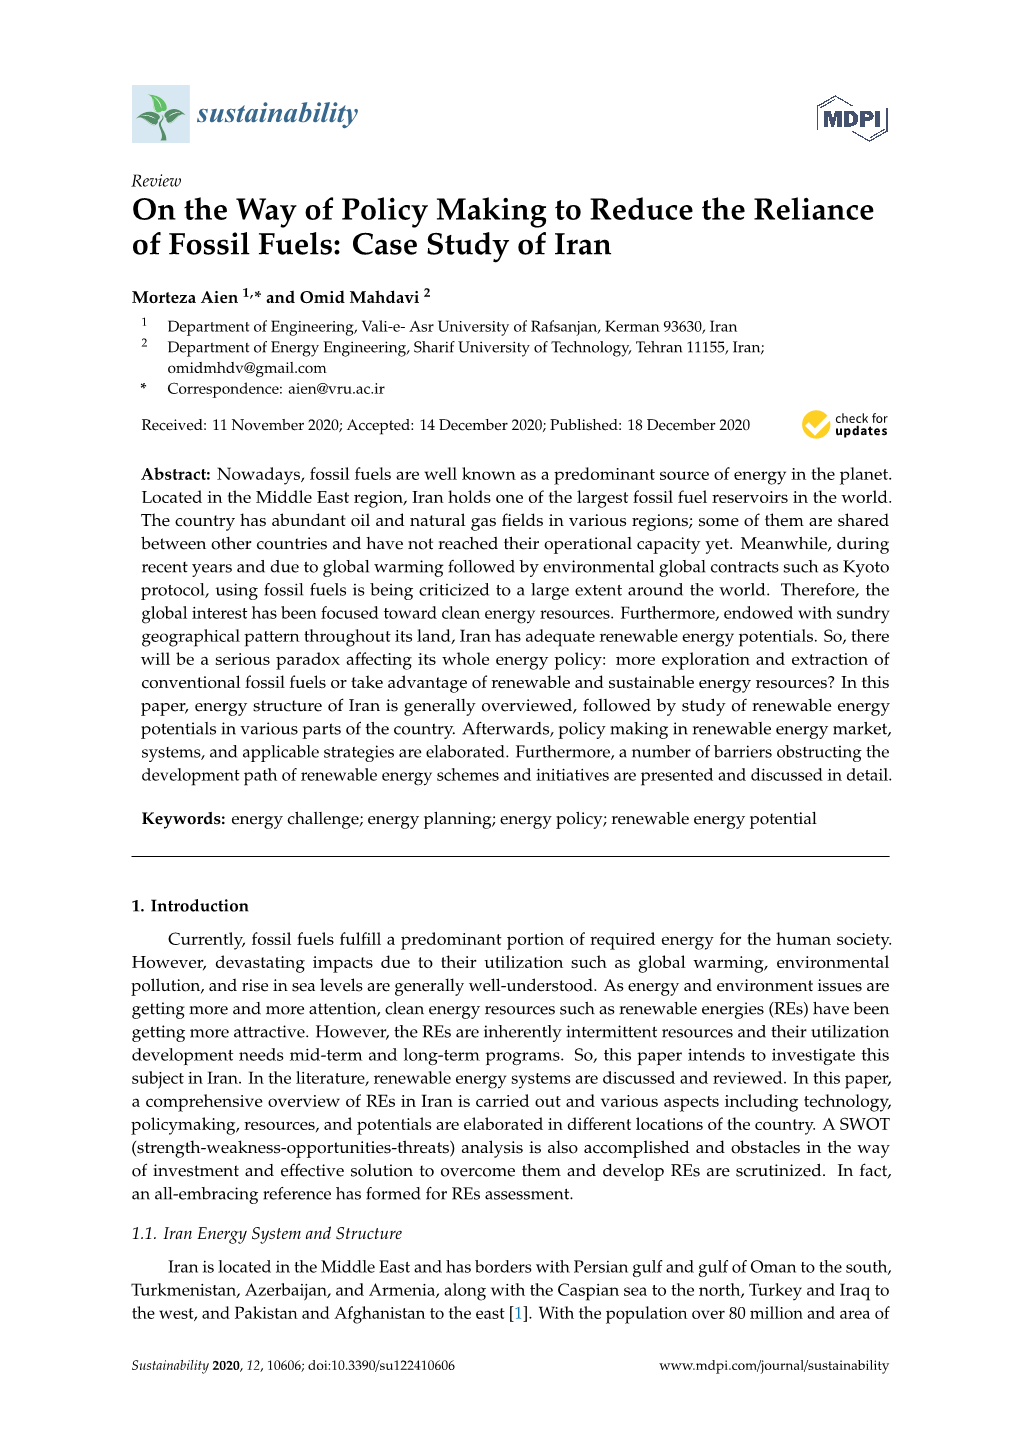 On the Way of Policy Making to Reduce the Reliance of Fossil Fuels: Case Study of Iran